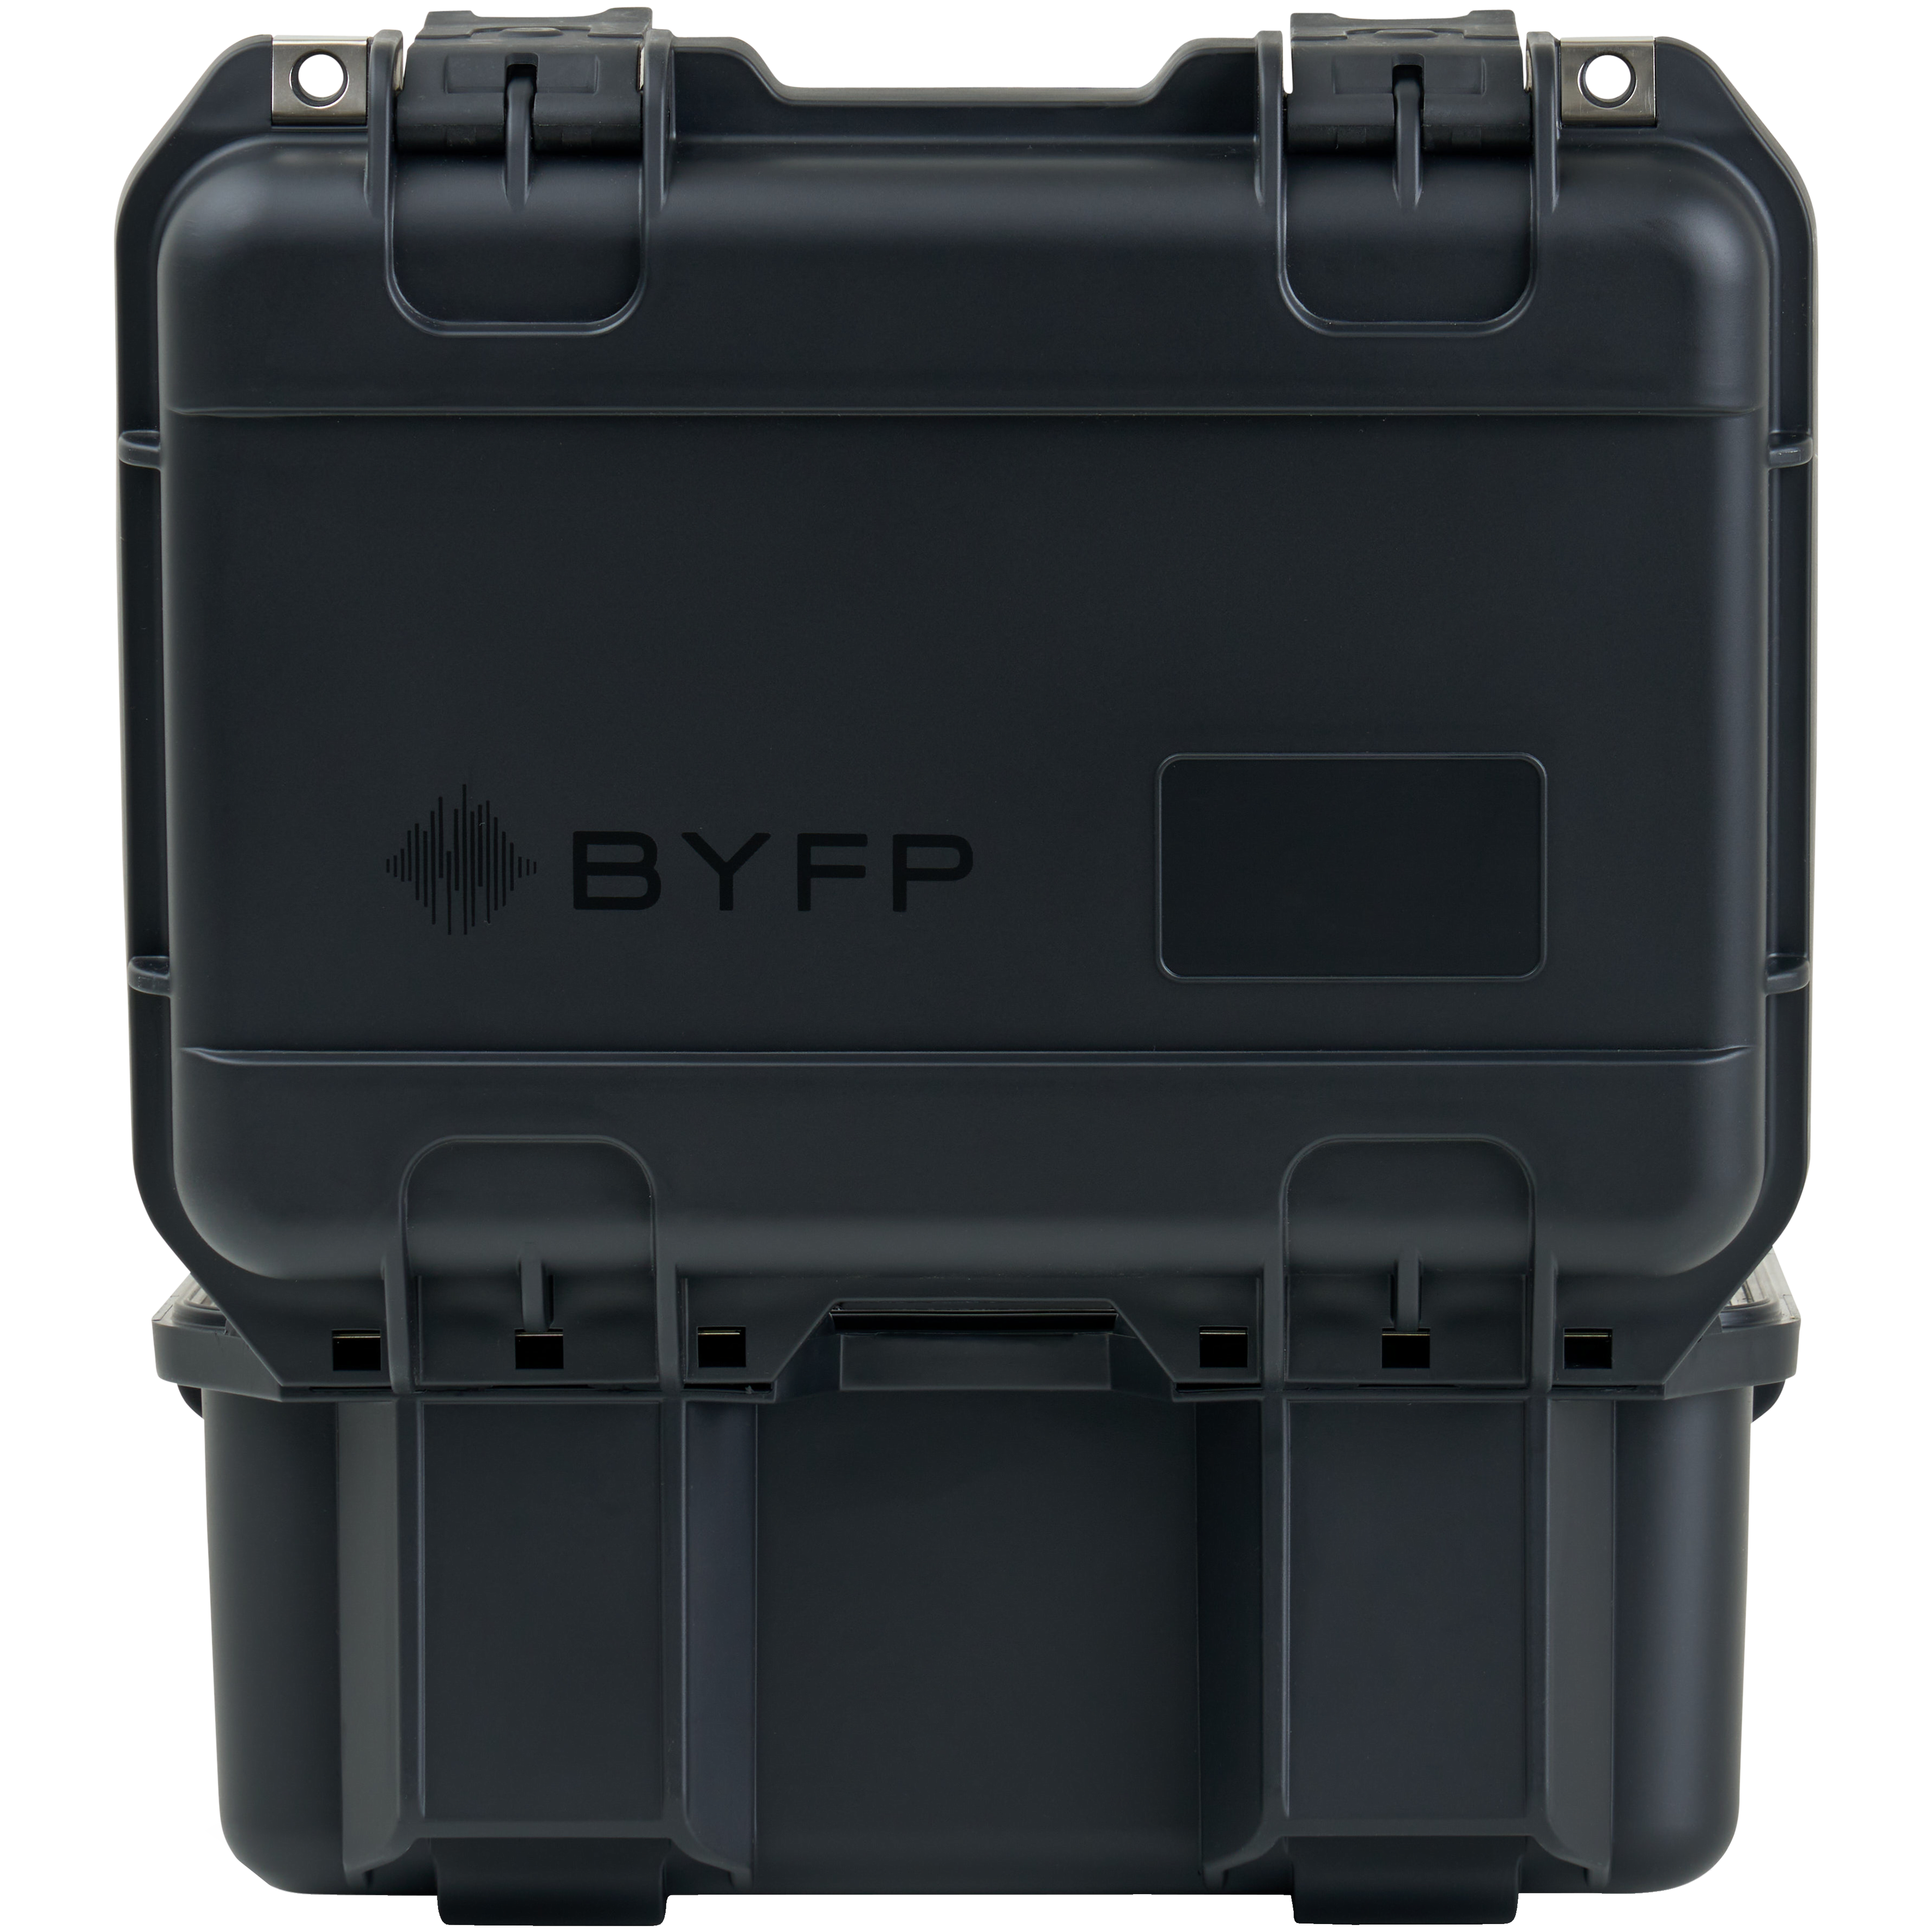 BYFP ipCase for 3x Radial Standard Size Direct Boxes